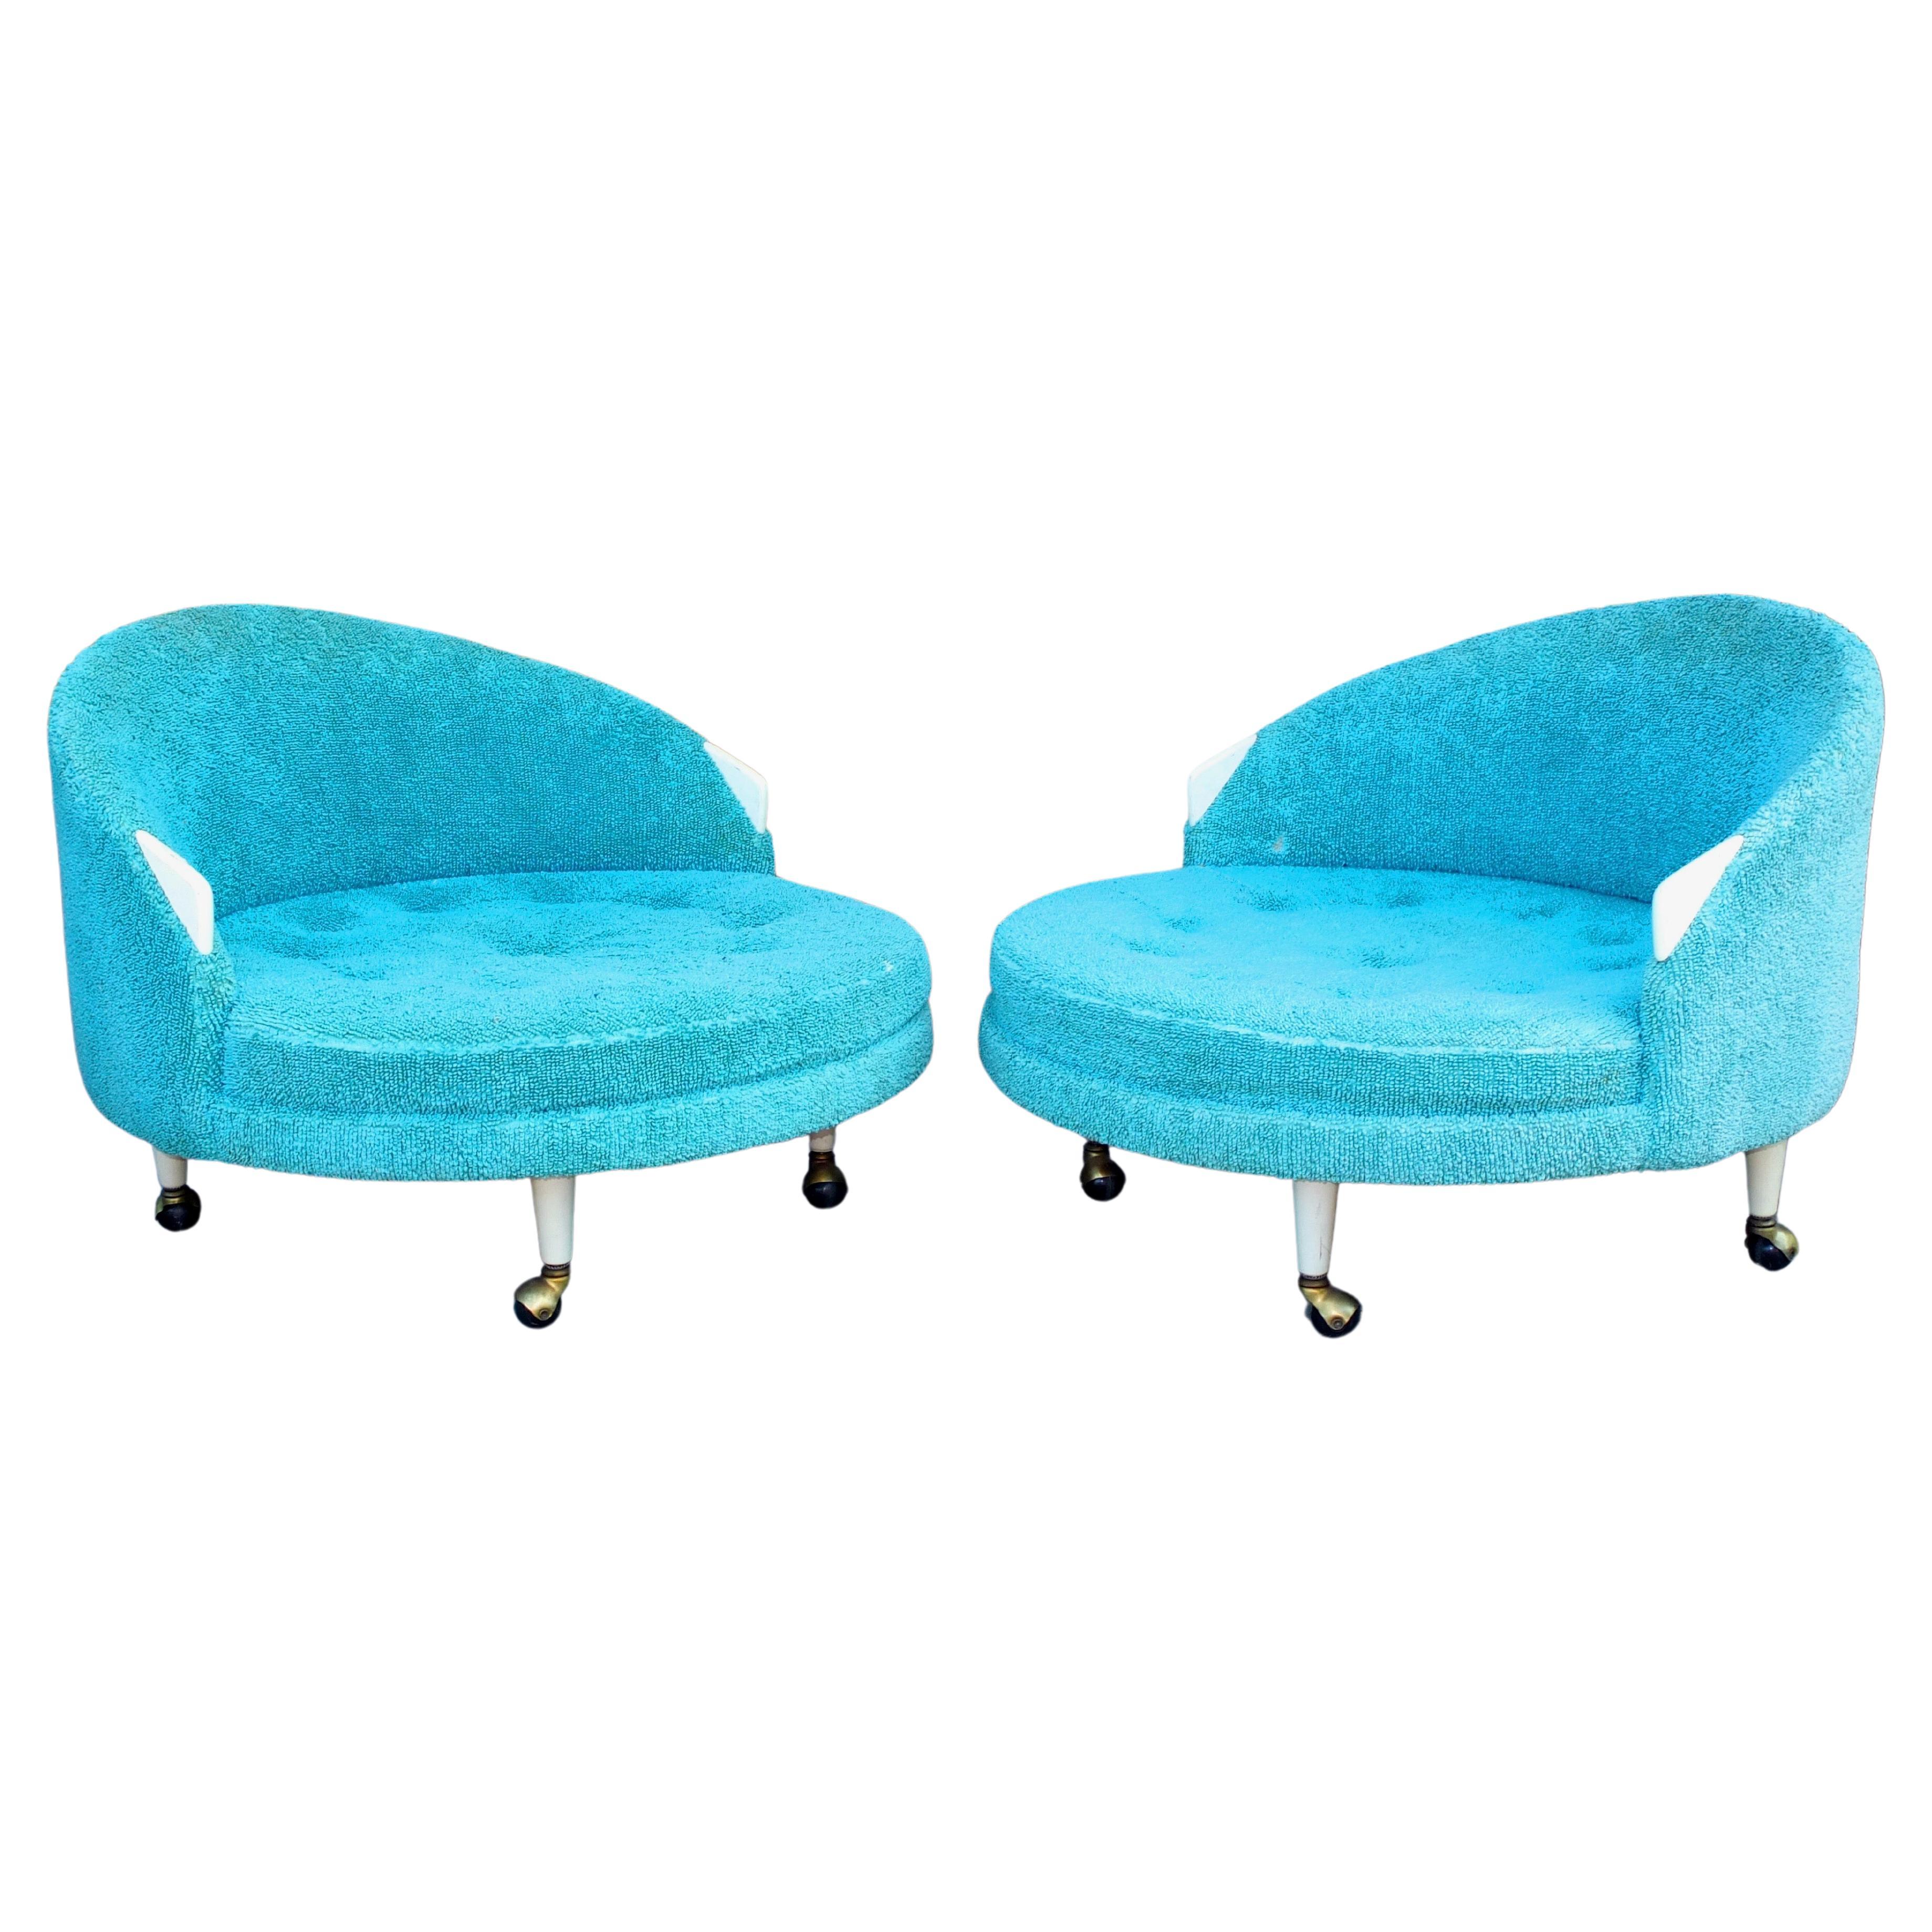 Pair Adrian Pearsall Havana Round Chairs 1717-RC For Sale